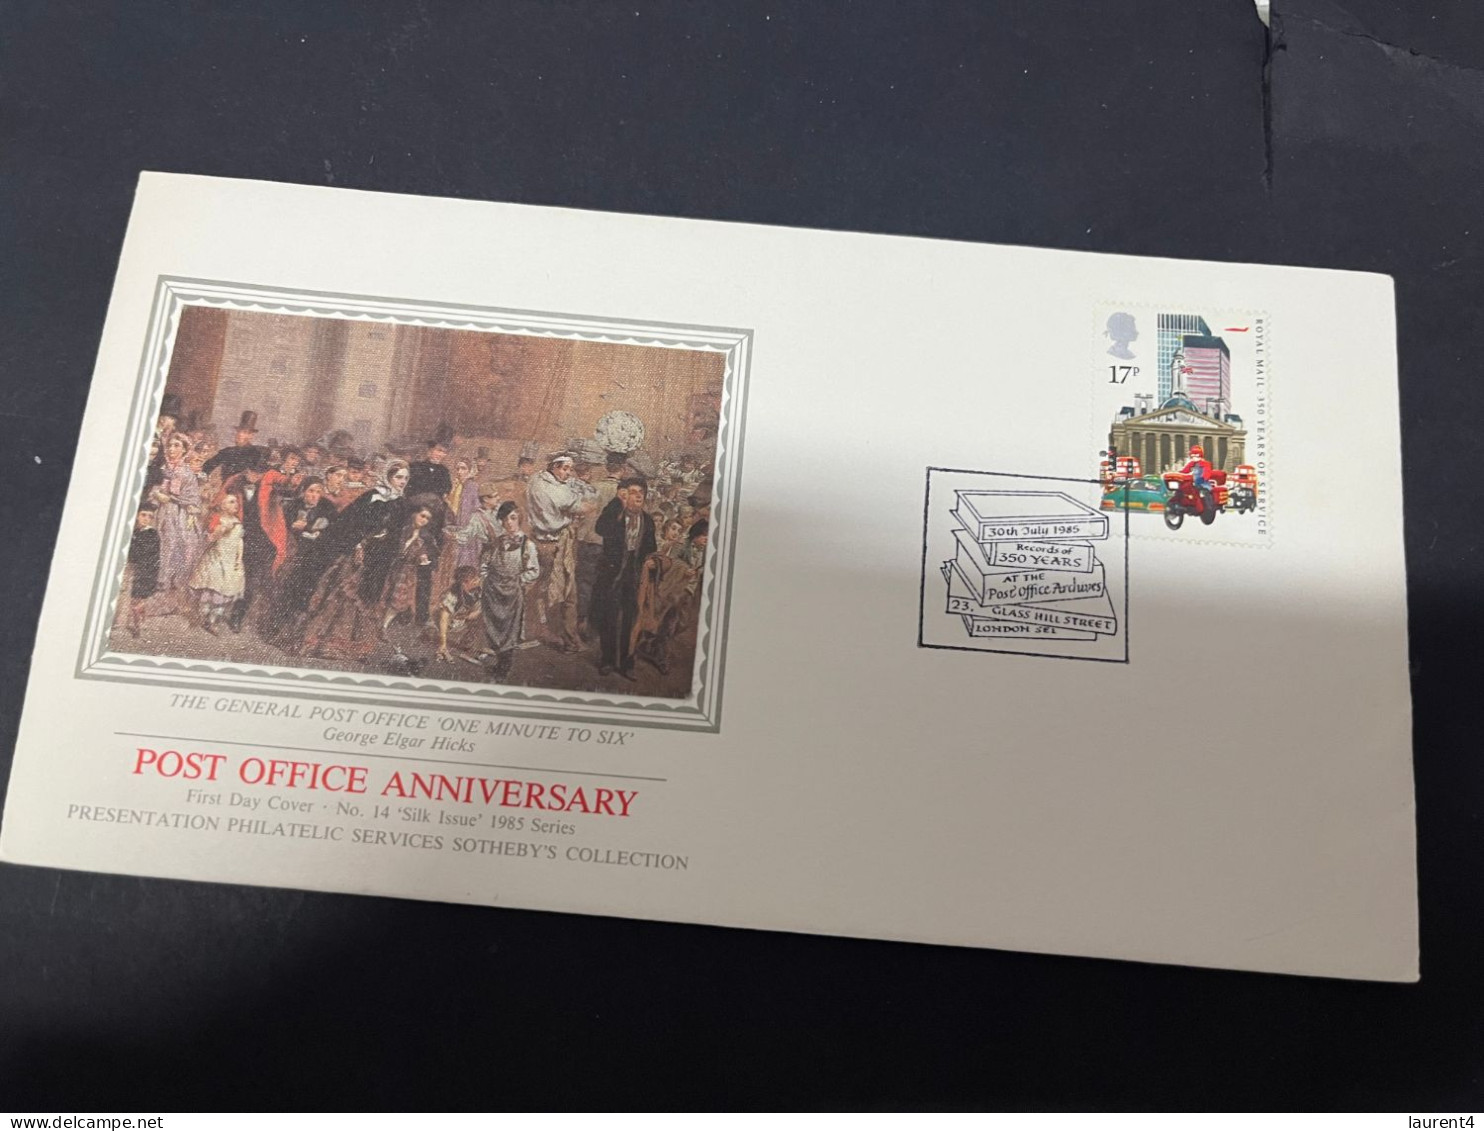 9-2-2024 (3 X 44) UK (Great Britain) FDC - 1985 - Post Office Anniversary - 1981-1990 Decimal Issues